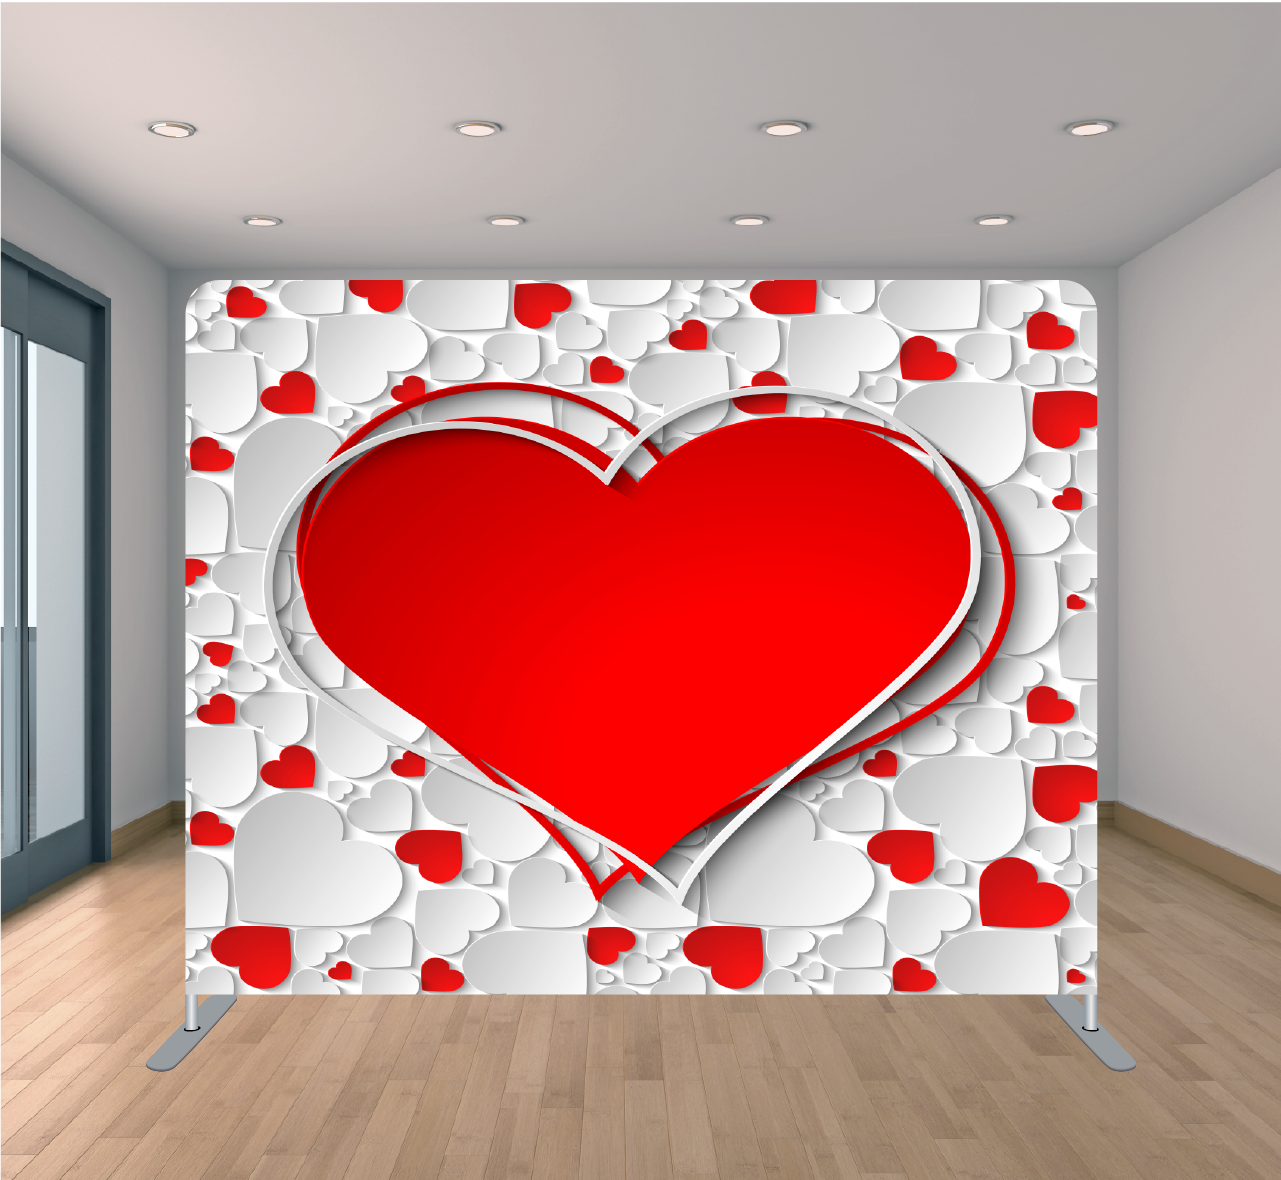 8X8ft Pillowcase Tension Backdrop- Red Heart